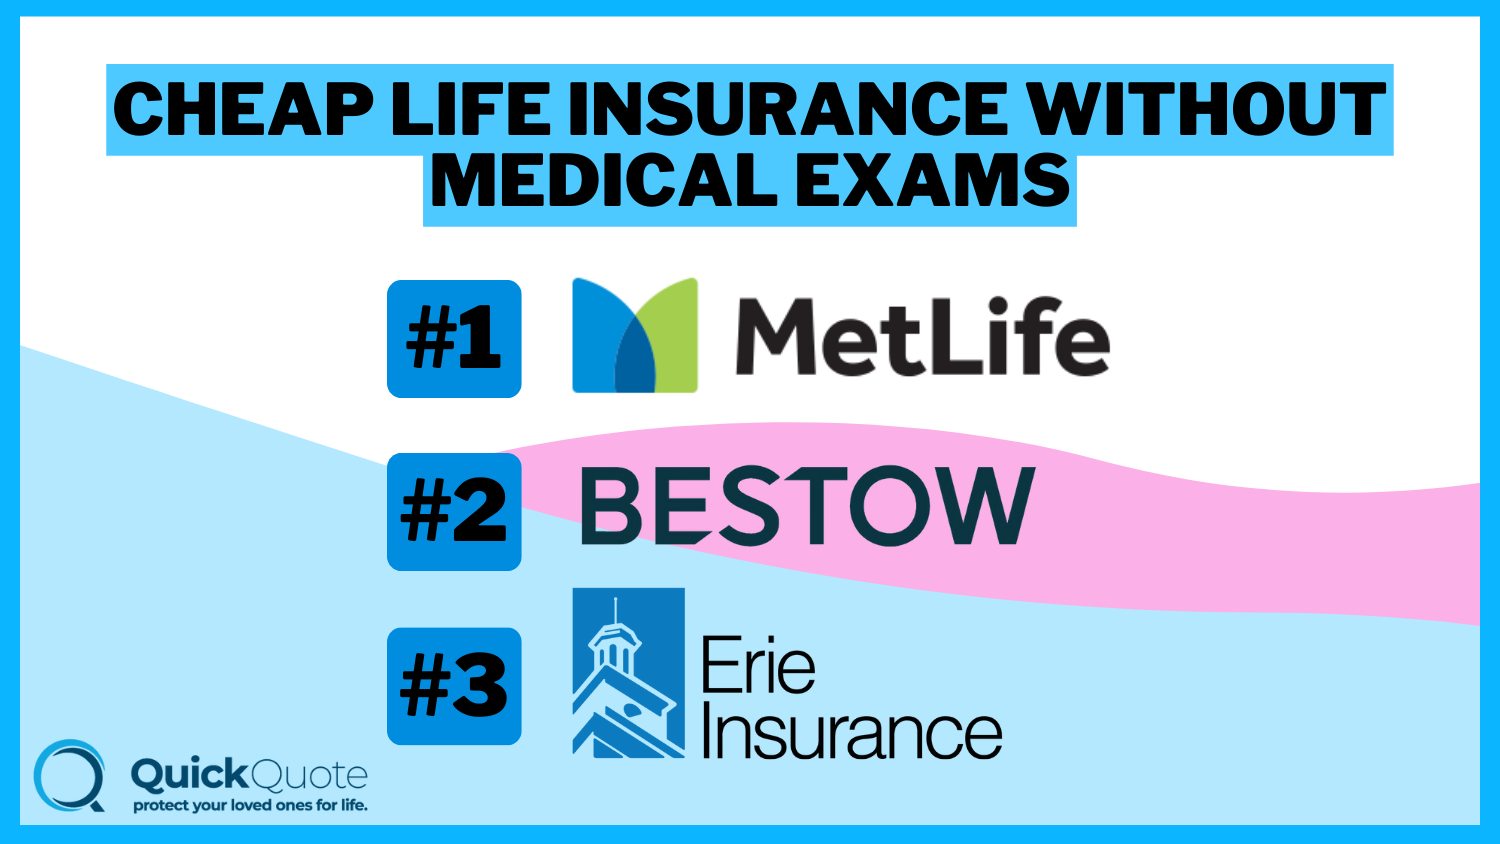 Cheap Life Insurance Without Medical Exams: MetLife, Bestow, and Erie